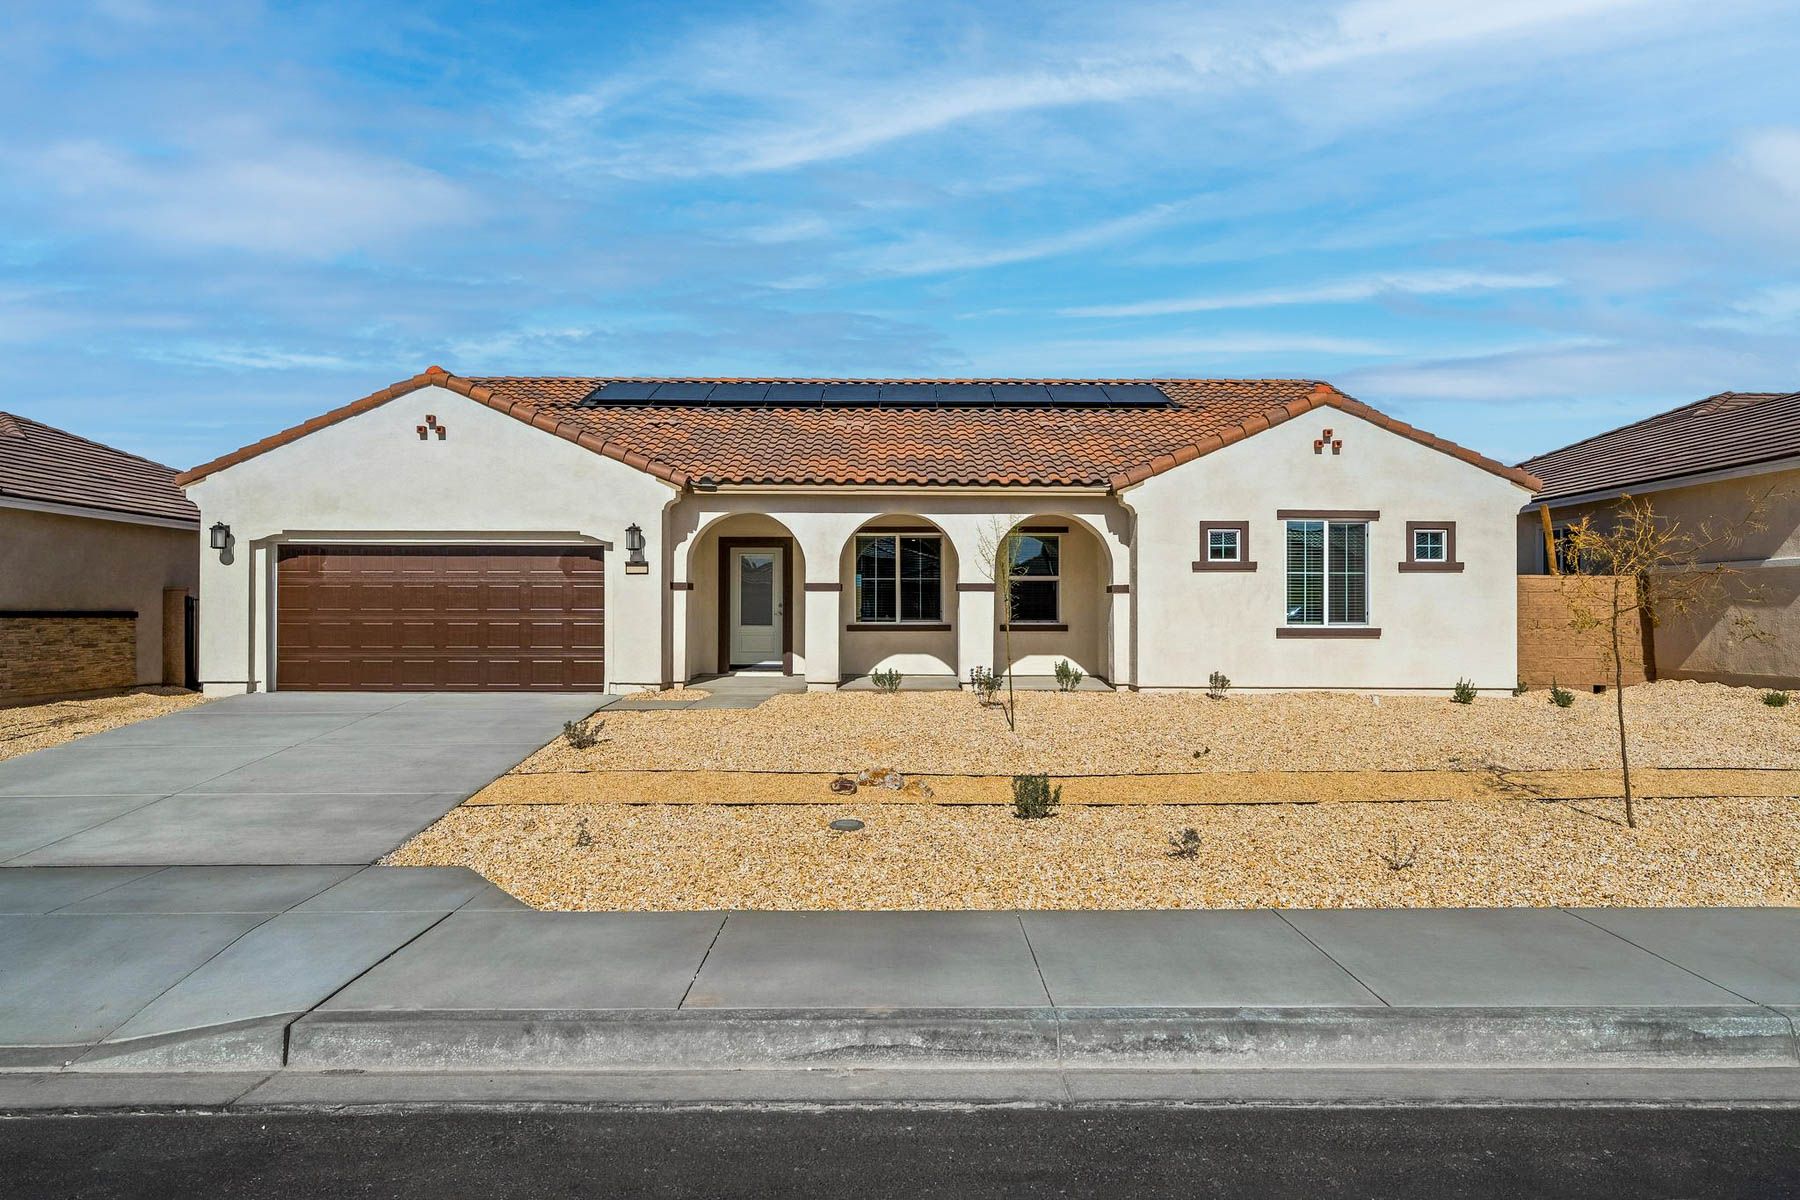 Desert Willow Village by LGI Homes:The La Jolla plan is brimming with curb appeal.